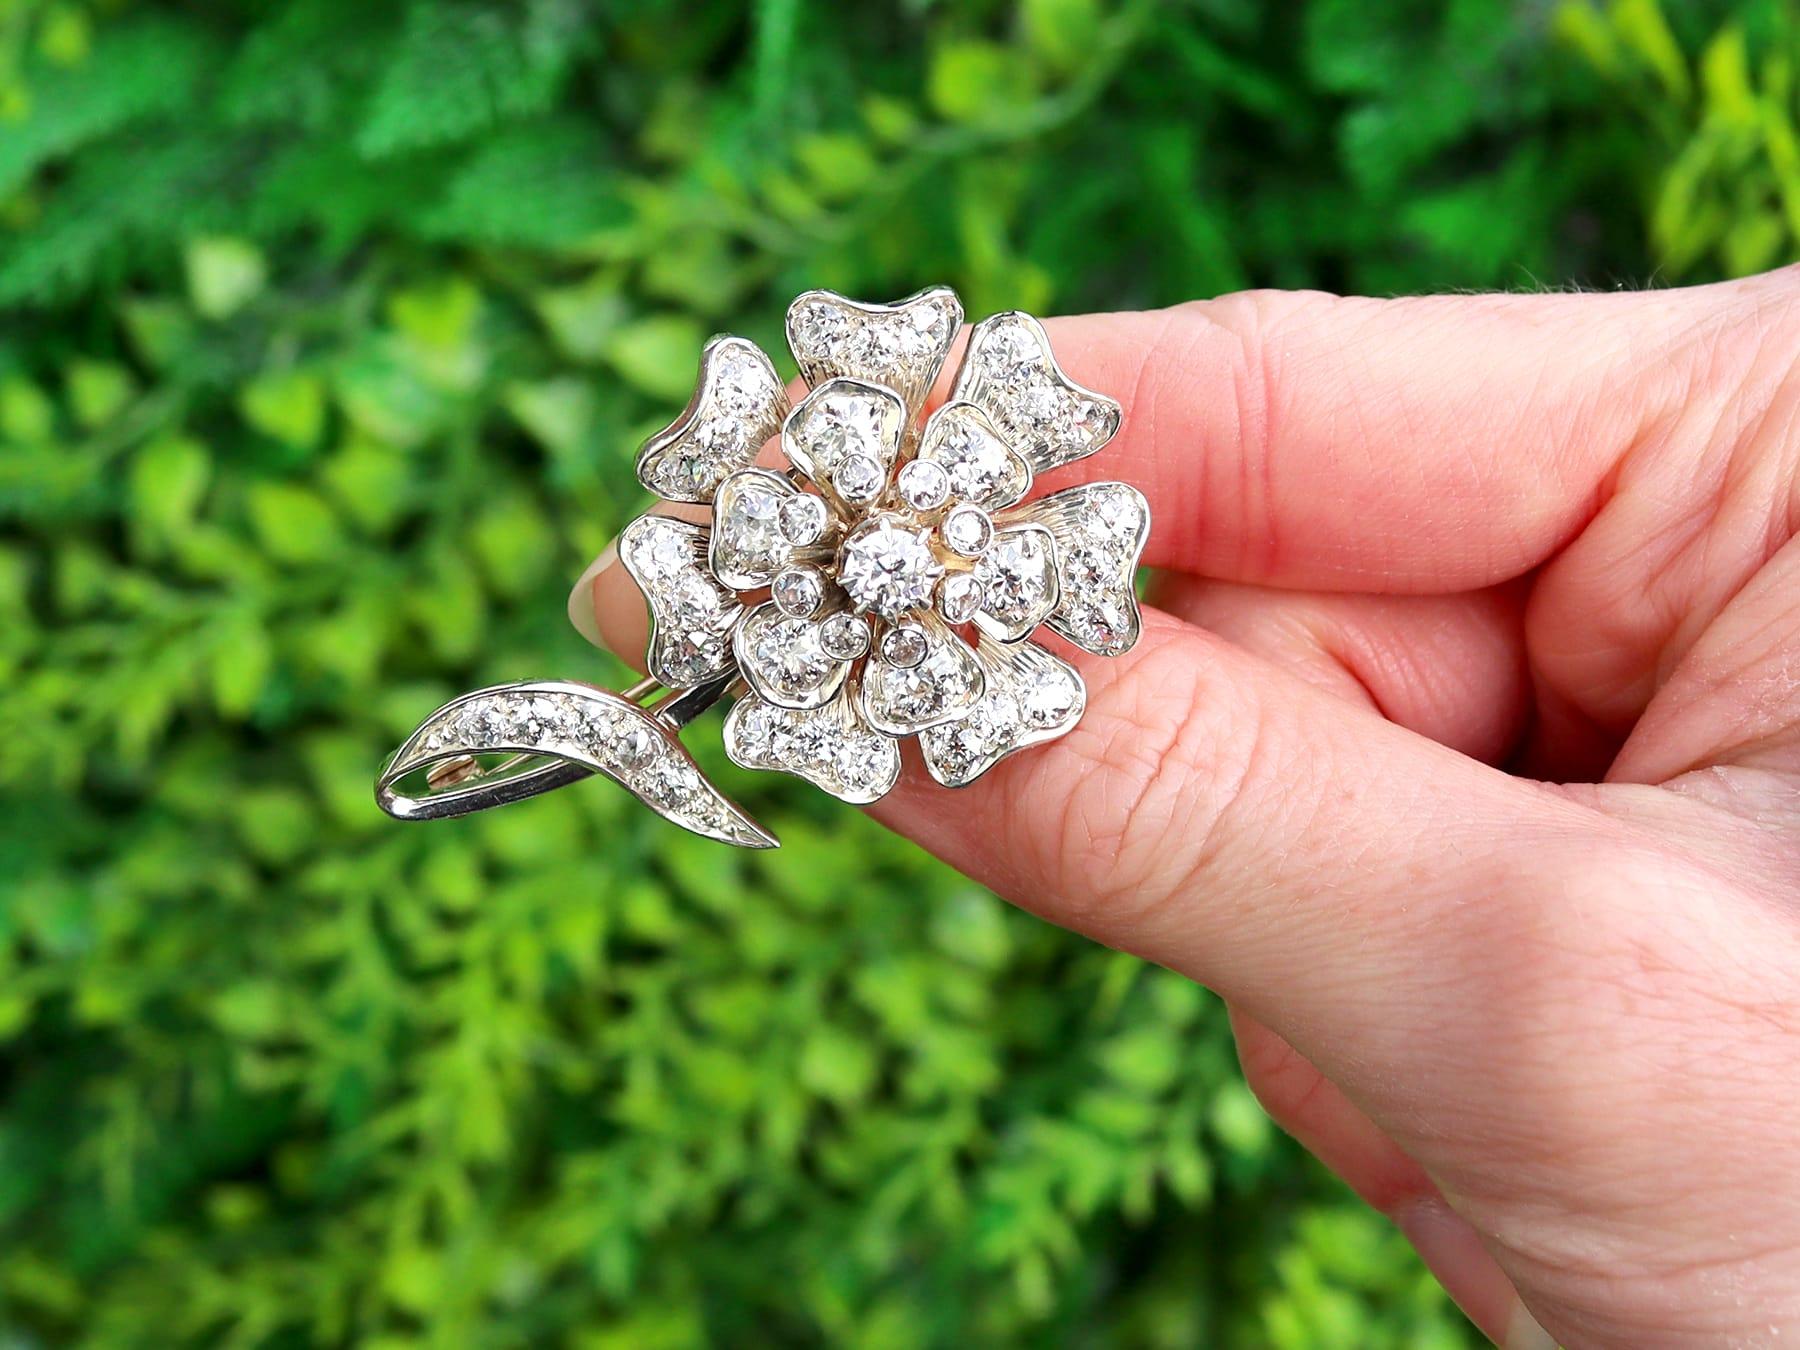 A stunning fine and impressive antique Victorian 4.59 carat diamond, 15 karat yellow gold and silver set brooch; part of our floral brooch collections.

This stunning, fine and impressive antique Victorian diamond brooch has been crafted in 15k